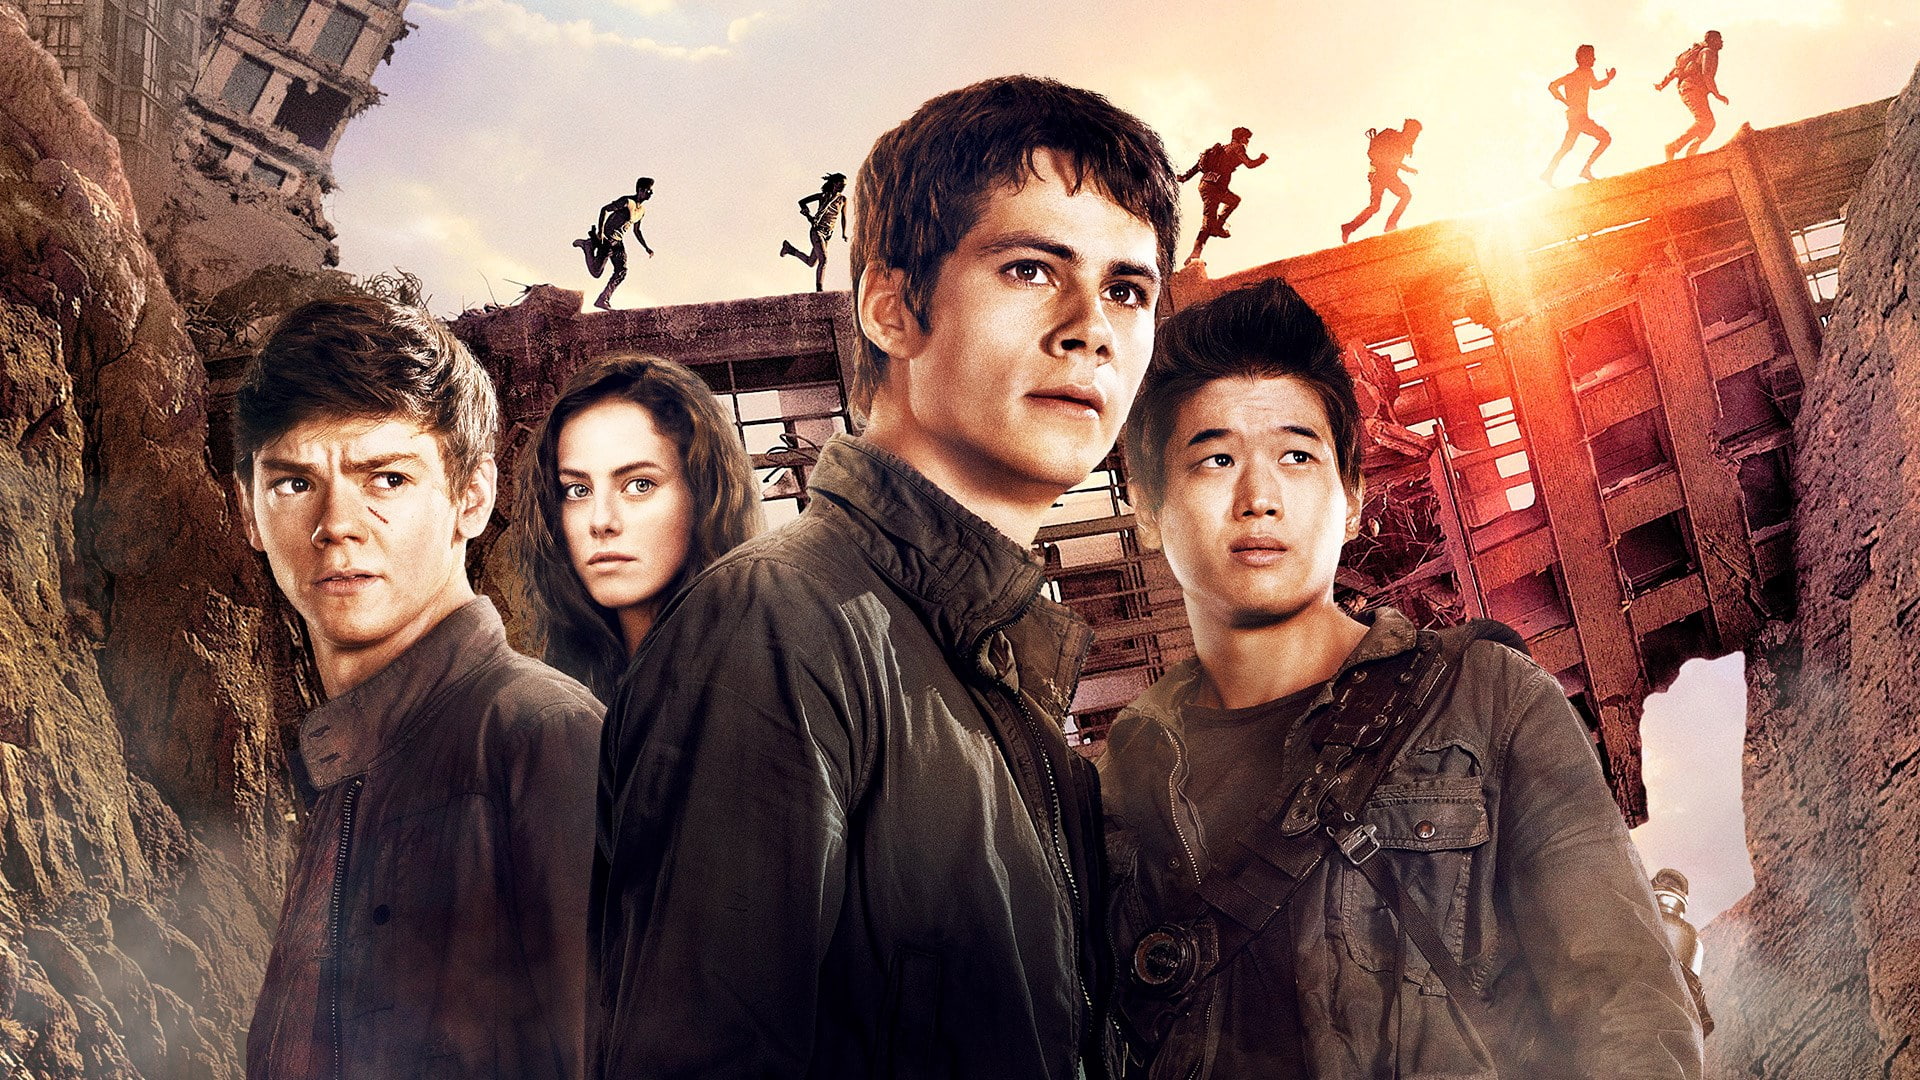 maze runner the scorch trials, group of people, young adult